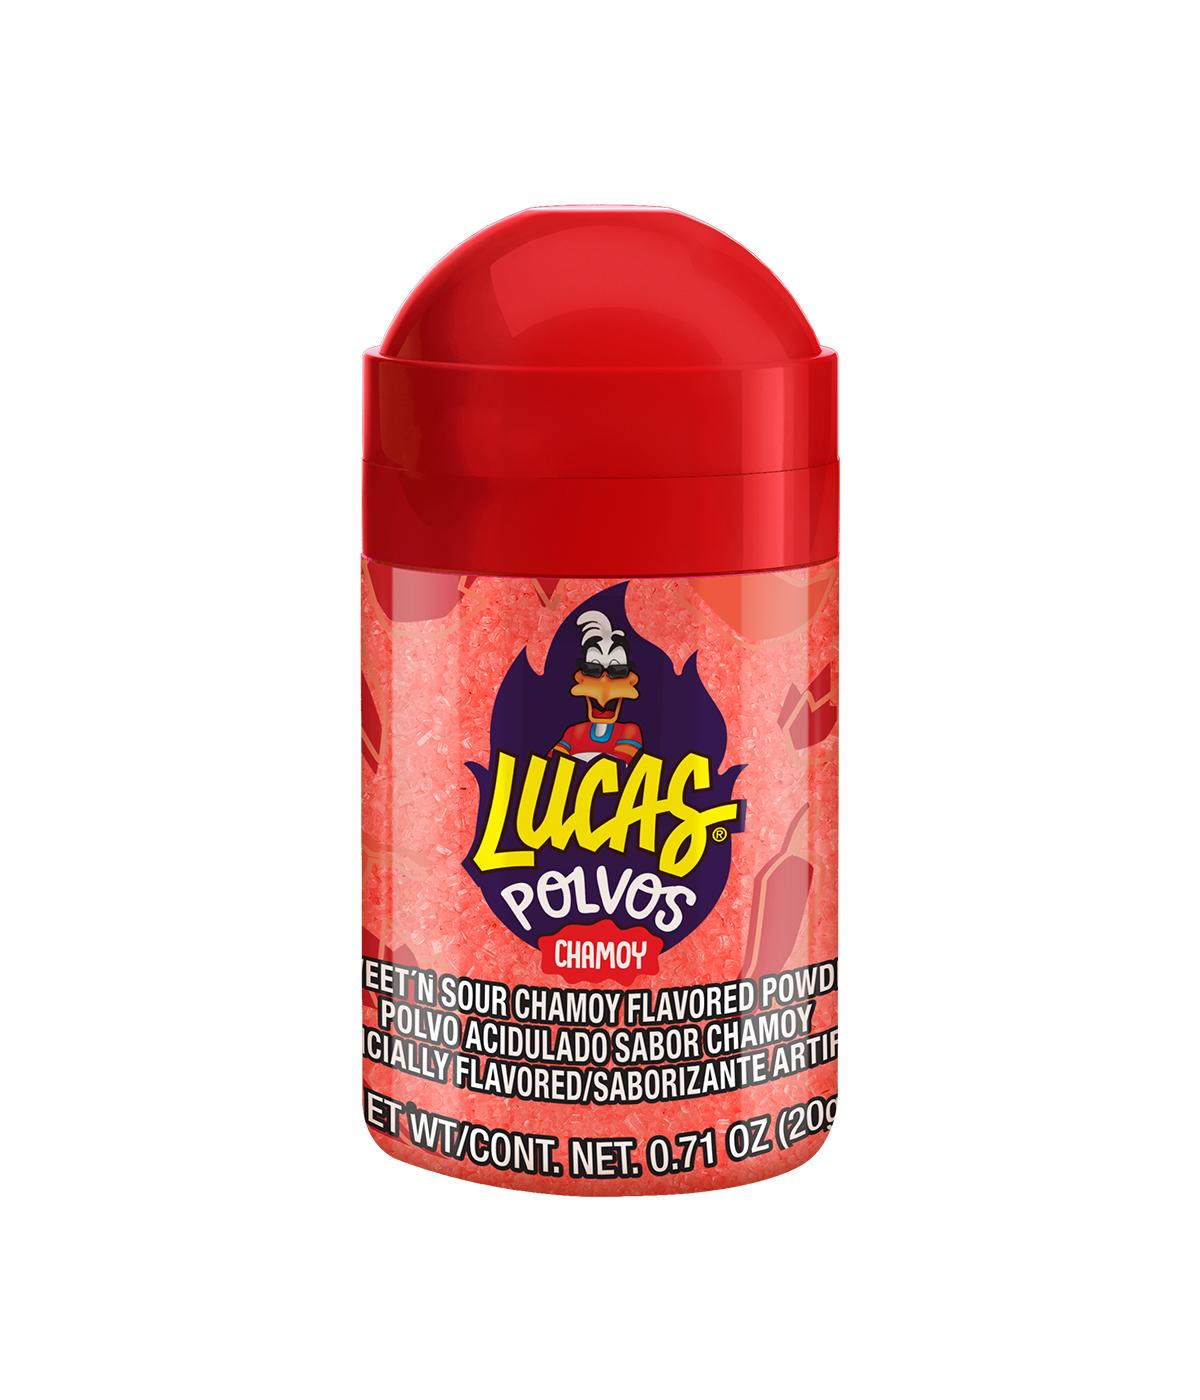 Lucas Polvos Chamoy Powder Candy; image 1 of 3